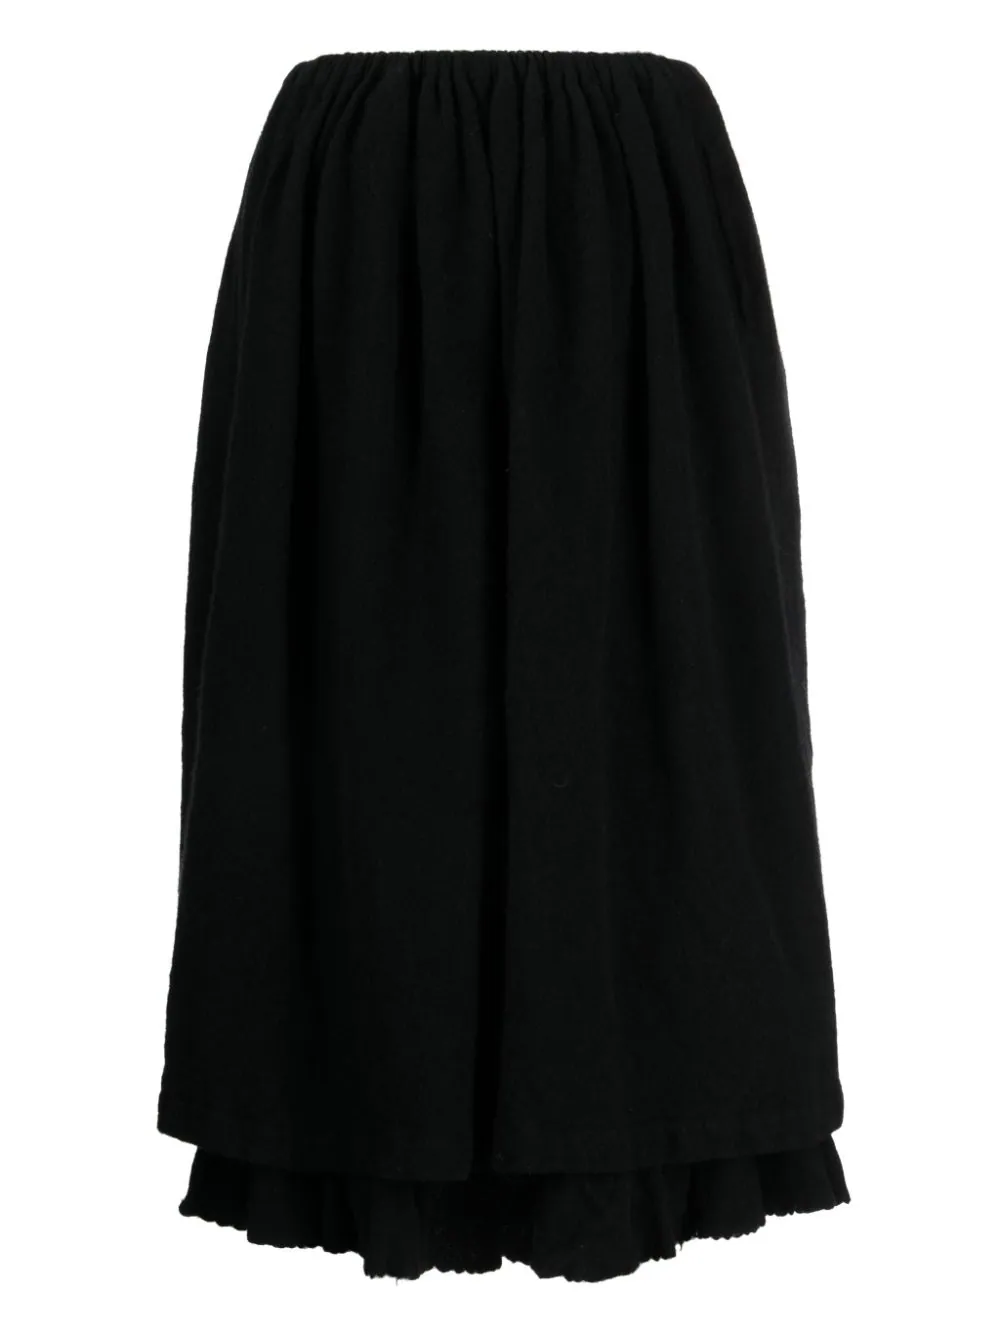 TAO COMME DES GARCONS Women Yarn Dyed Wool Skirt